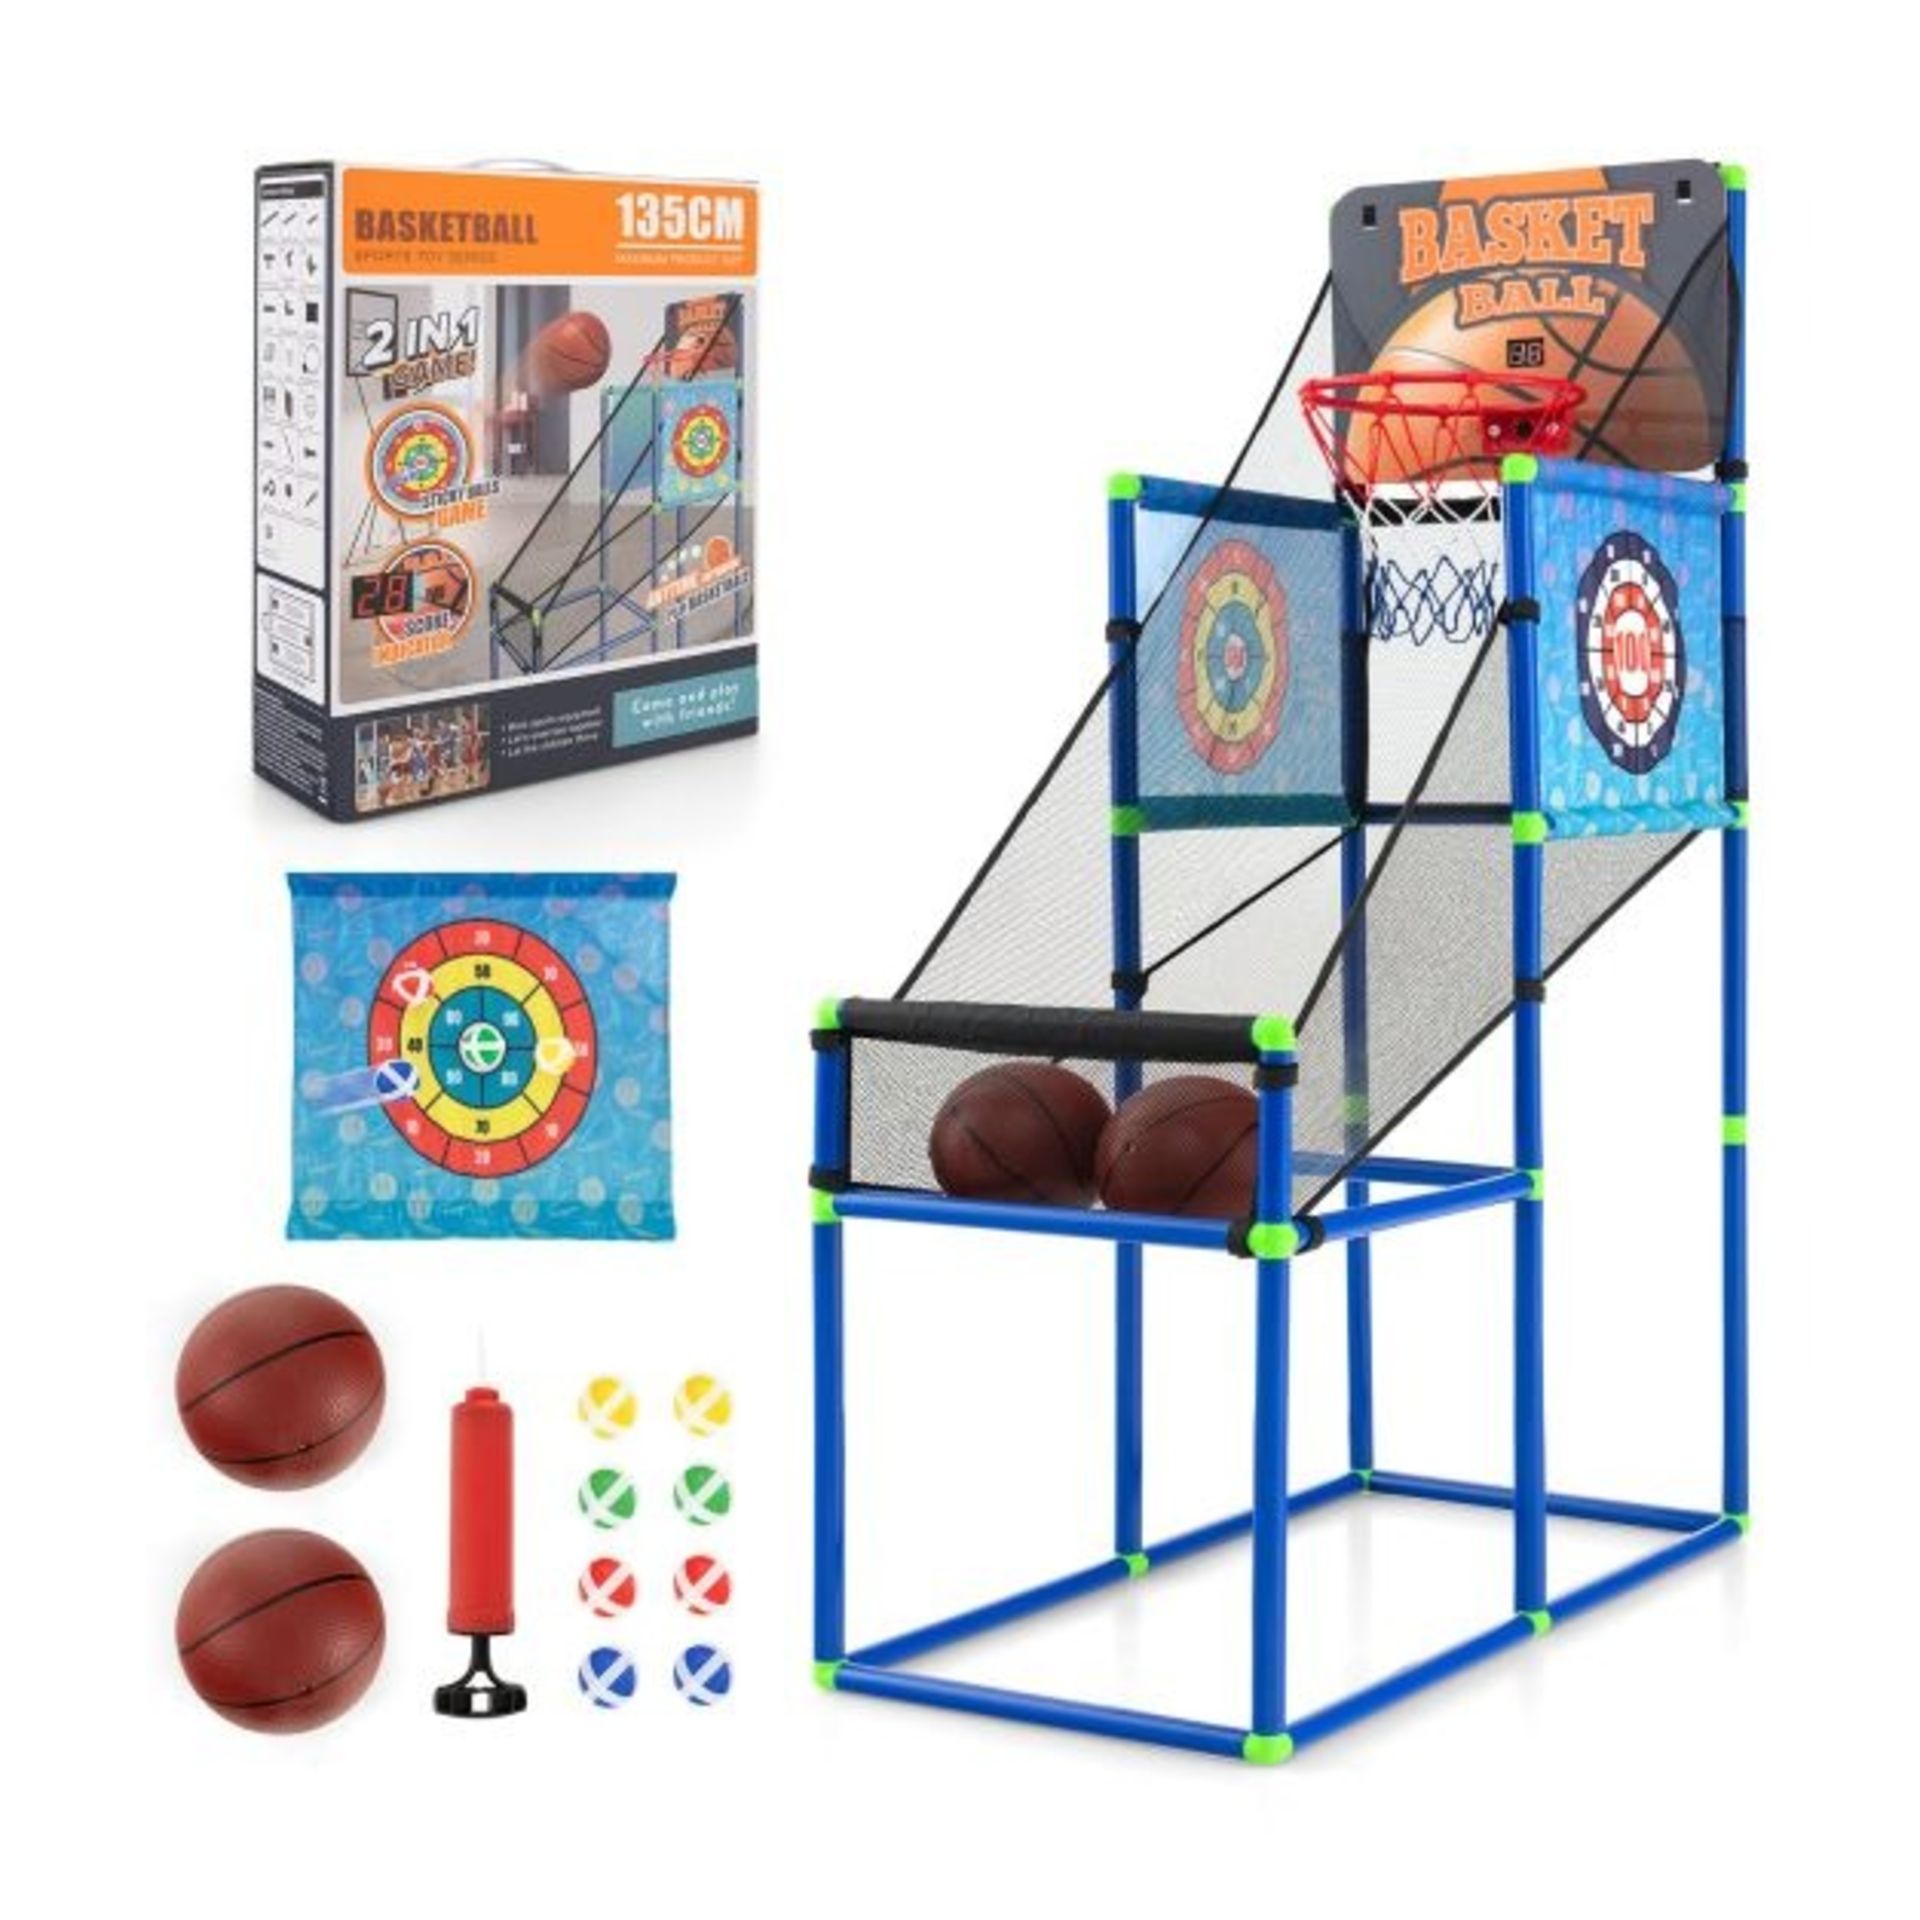 2-in-1 Kids Basketball Arcade Game with Electronic Scoreboard - ER53